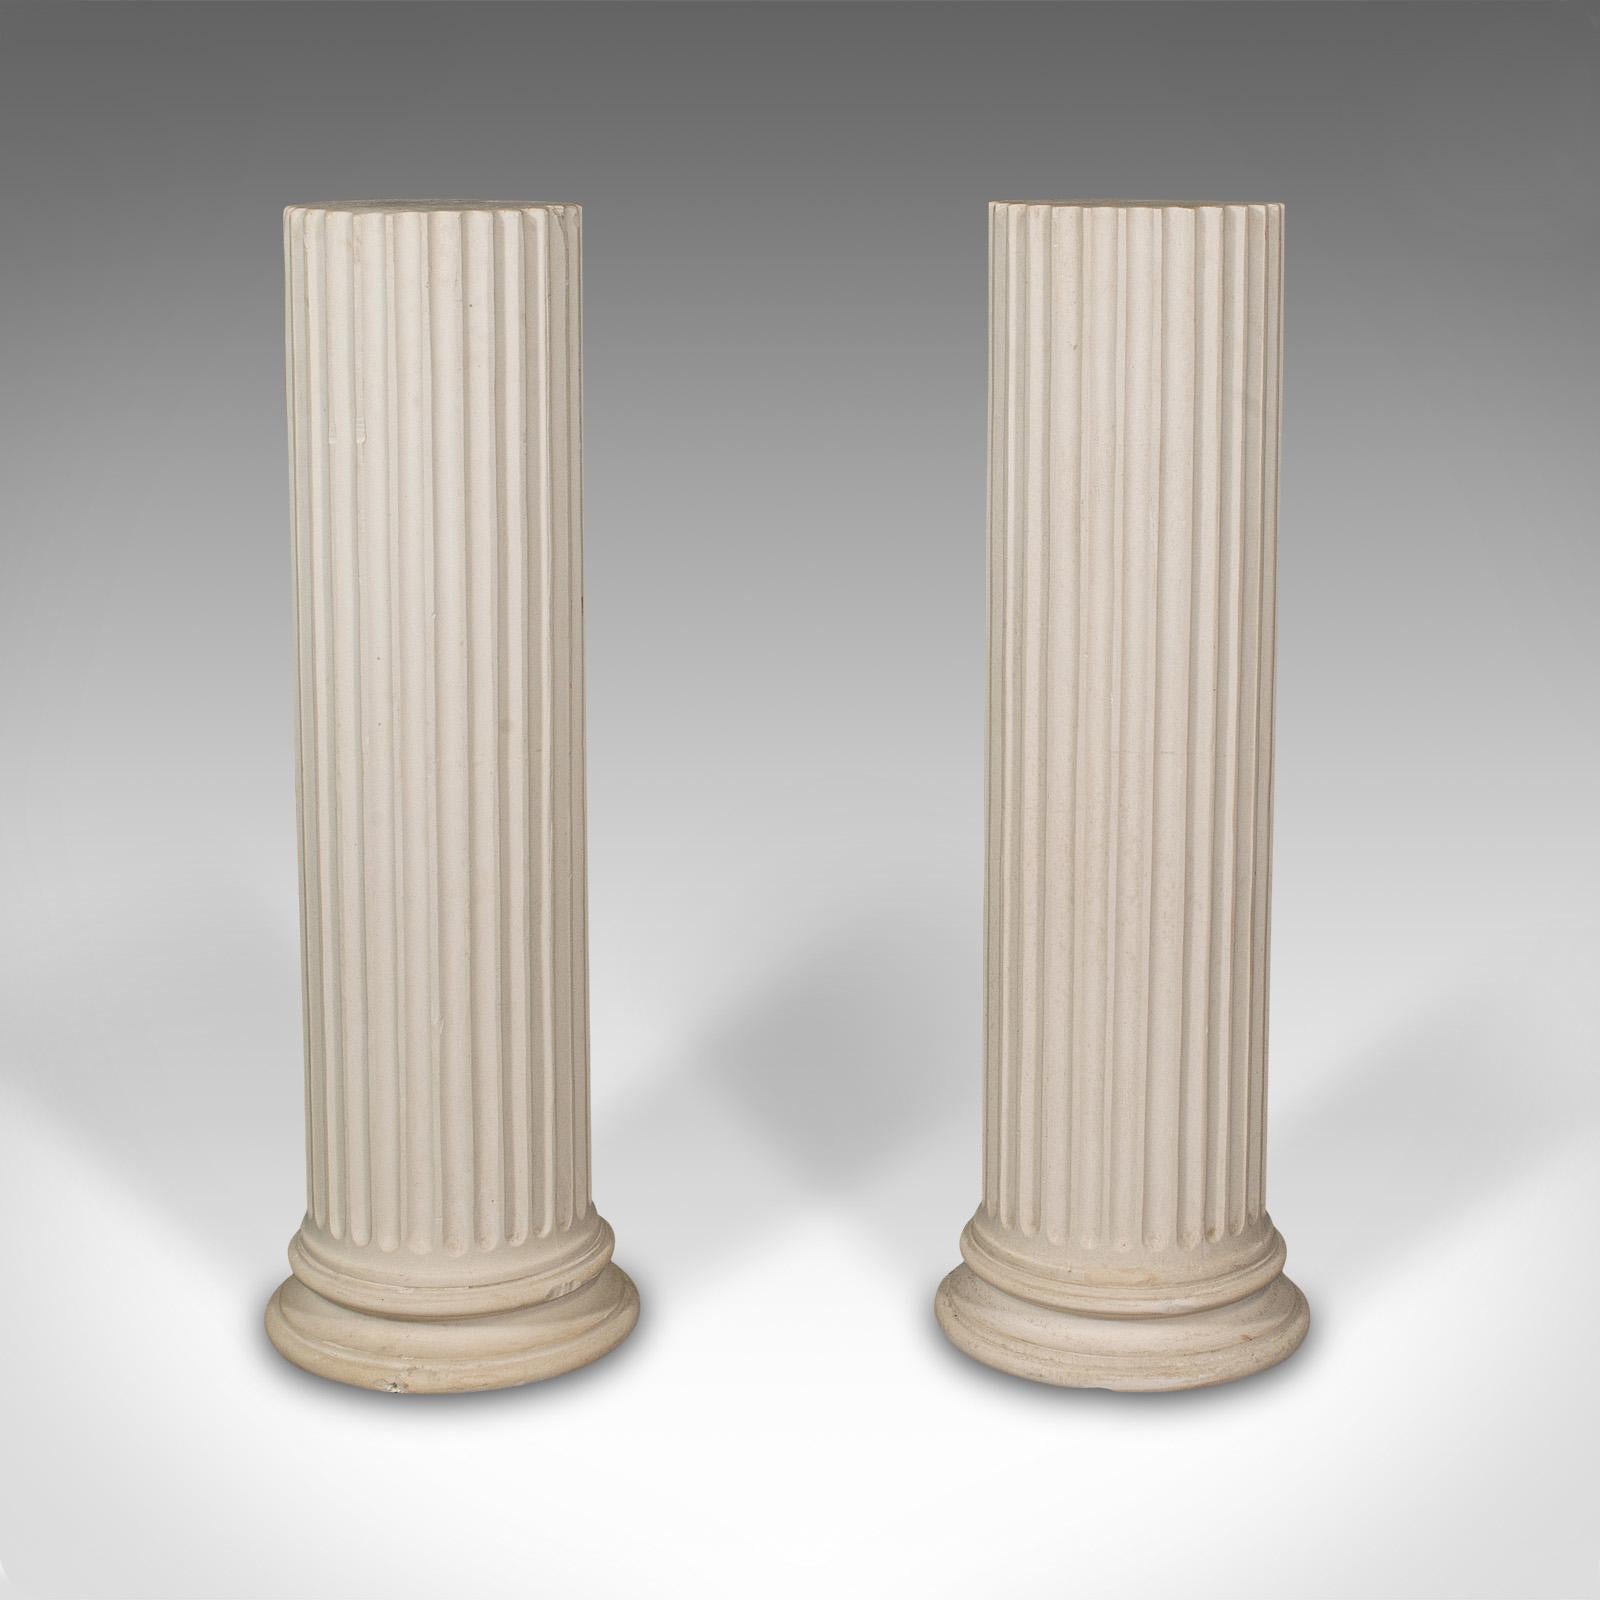 This is a pair of vintage fluted display pillars. An English, plaster jardiniere or planter stand in classical taste, dating to the late 20th century.

Classically appealing columns, ideal for decorative elegance or as display stands
Displaying a